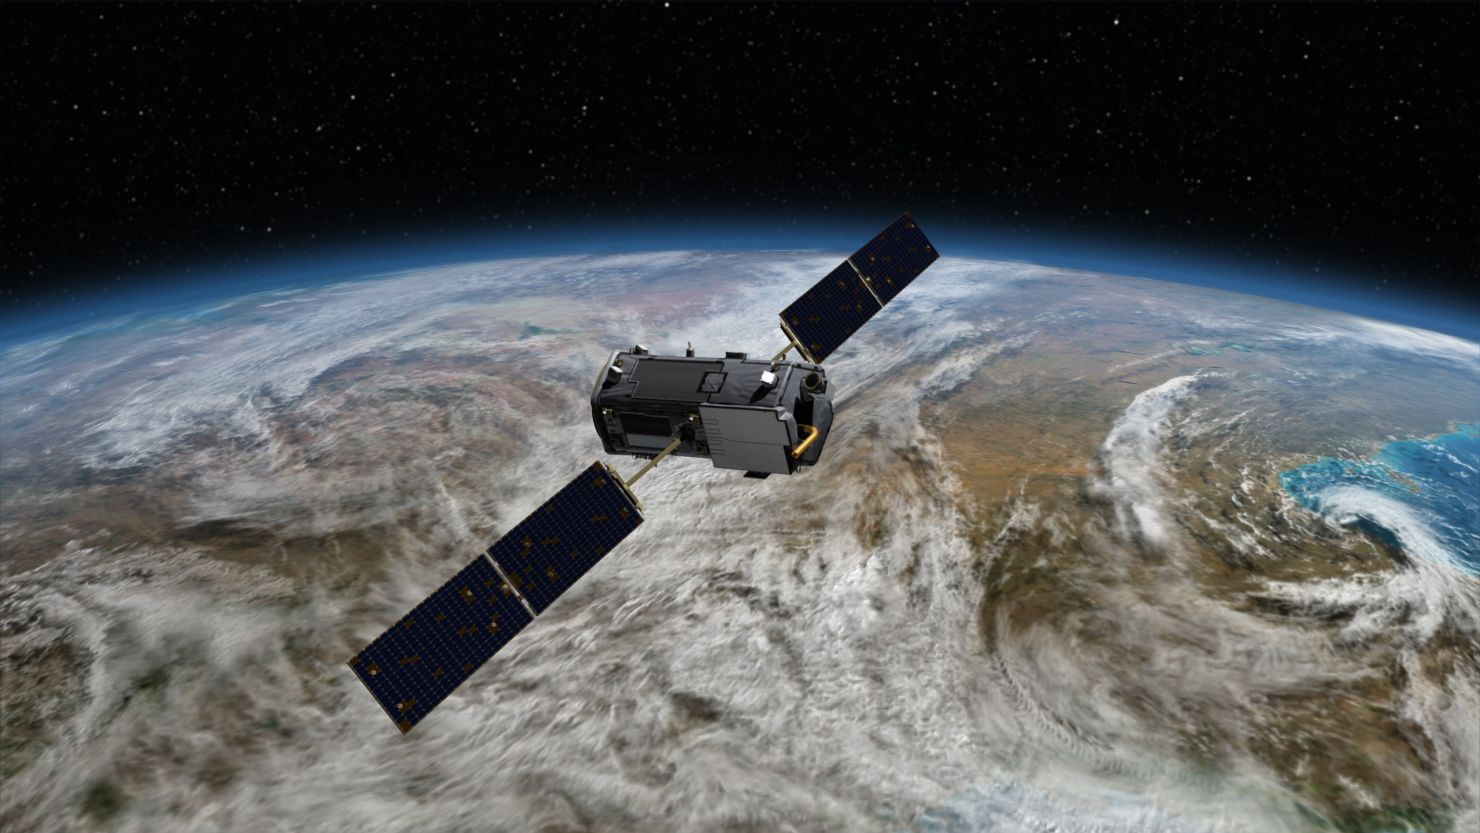 The Orbiting Carbon Observatory-2 (OCO-2) is expected to join a group of other satellites to study atmospheric carbon dioxide.